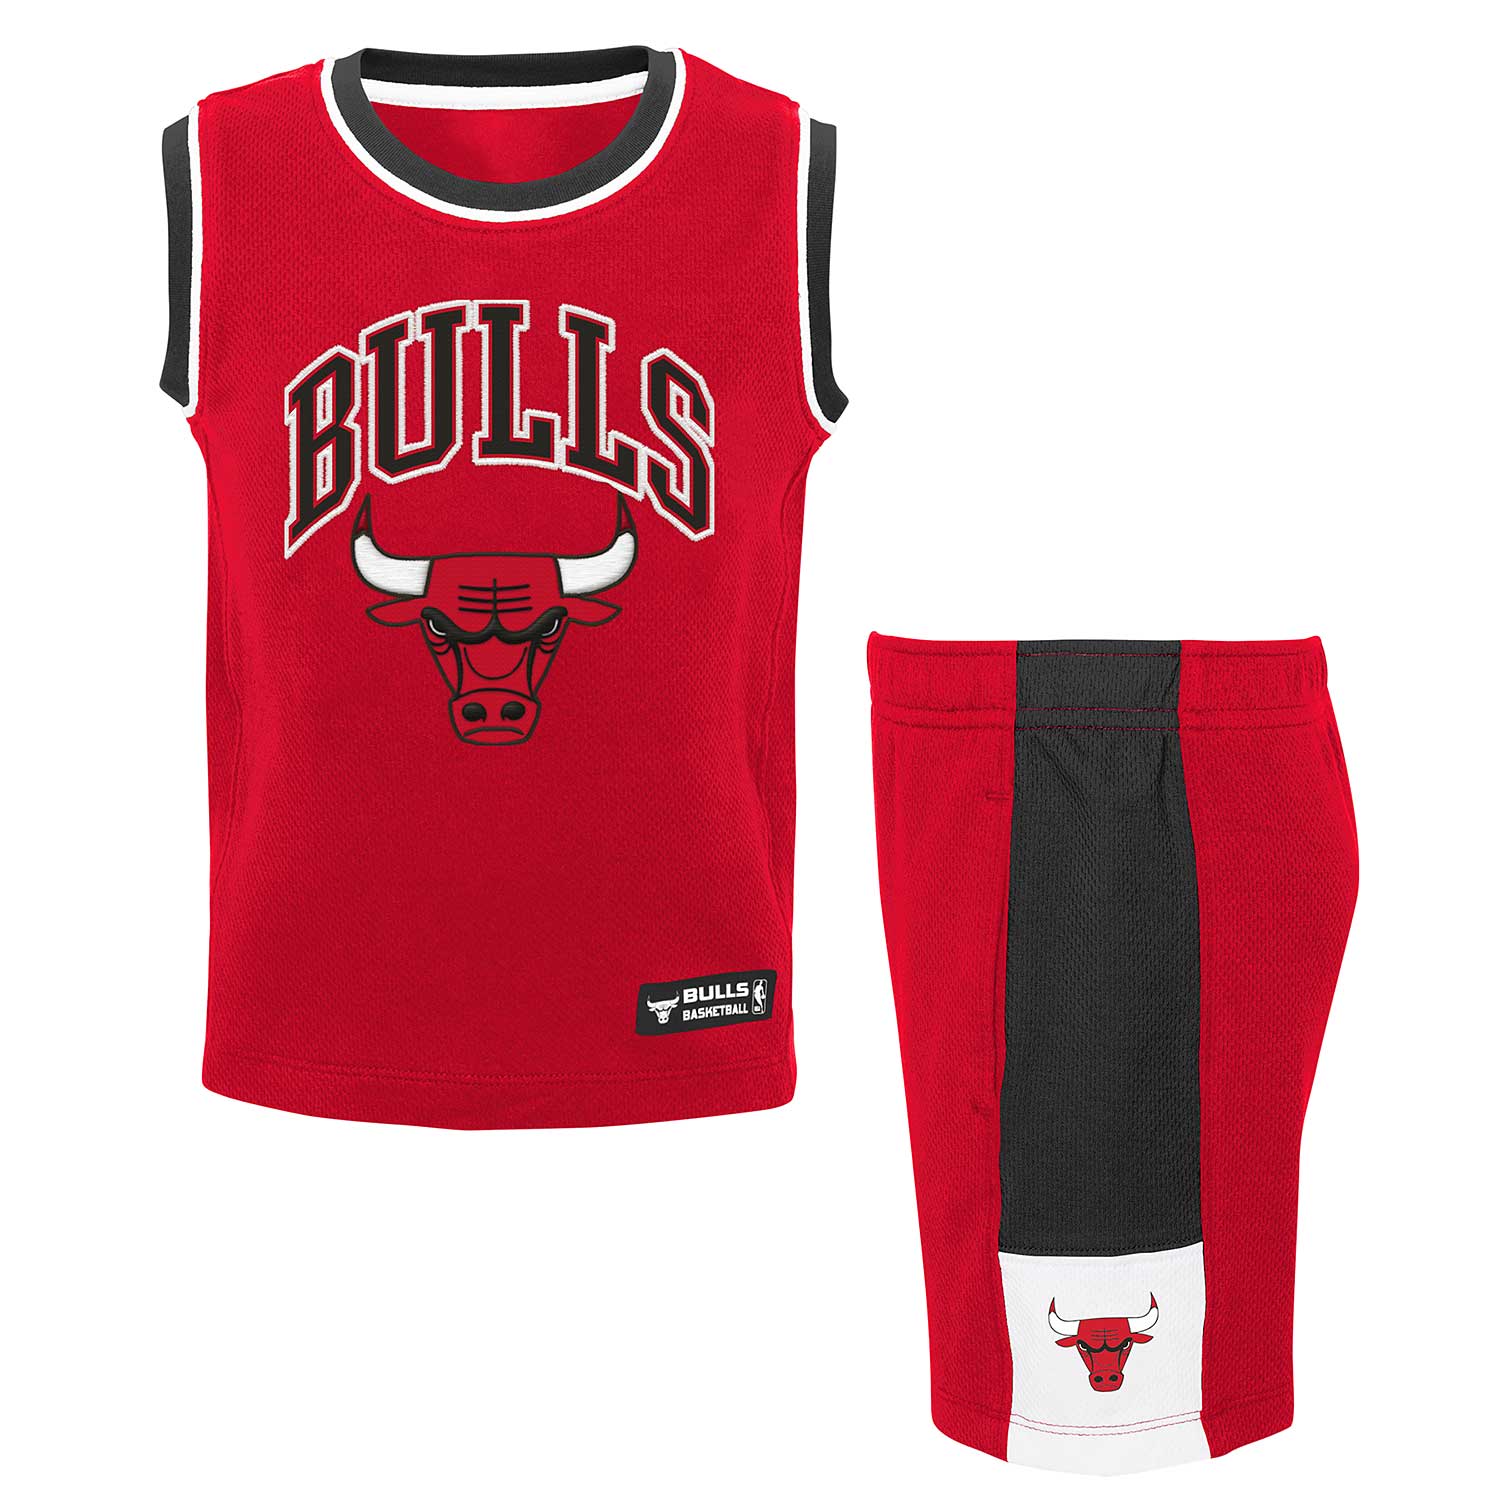 Chicago Bulls Women's Apparel, Bulls Ladies Jerseys, Gifts for her,  Clothing